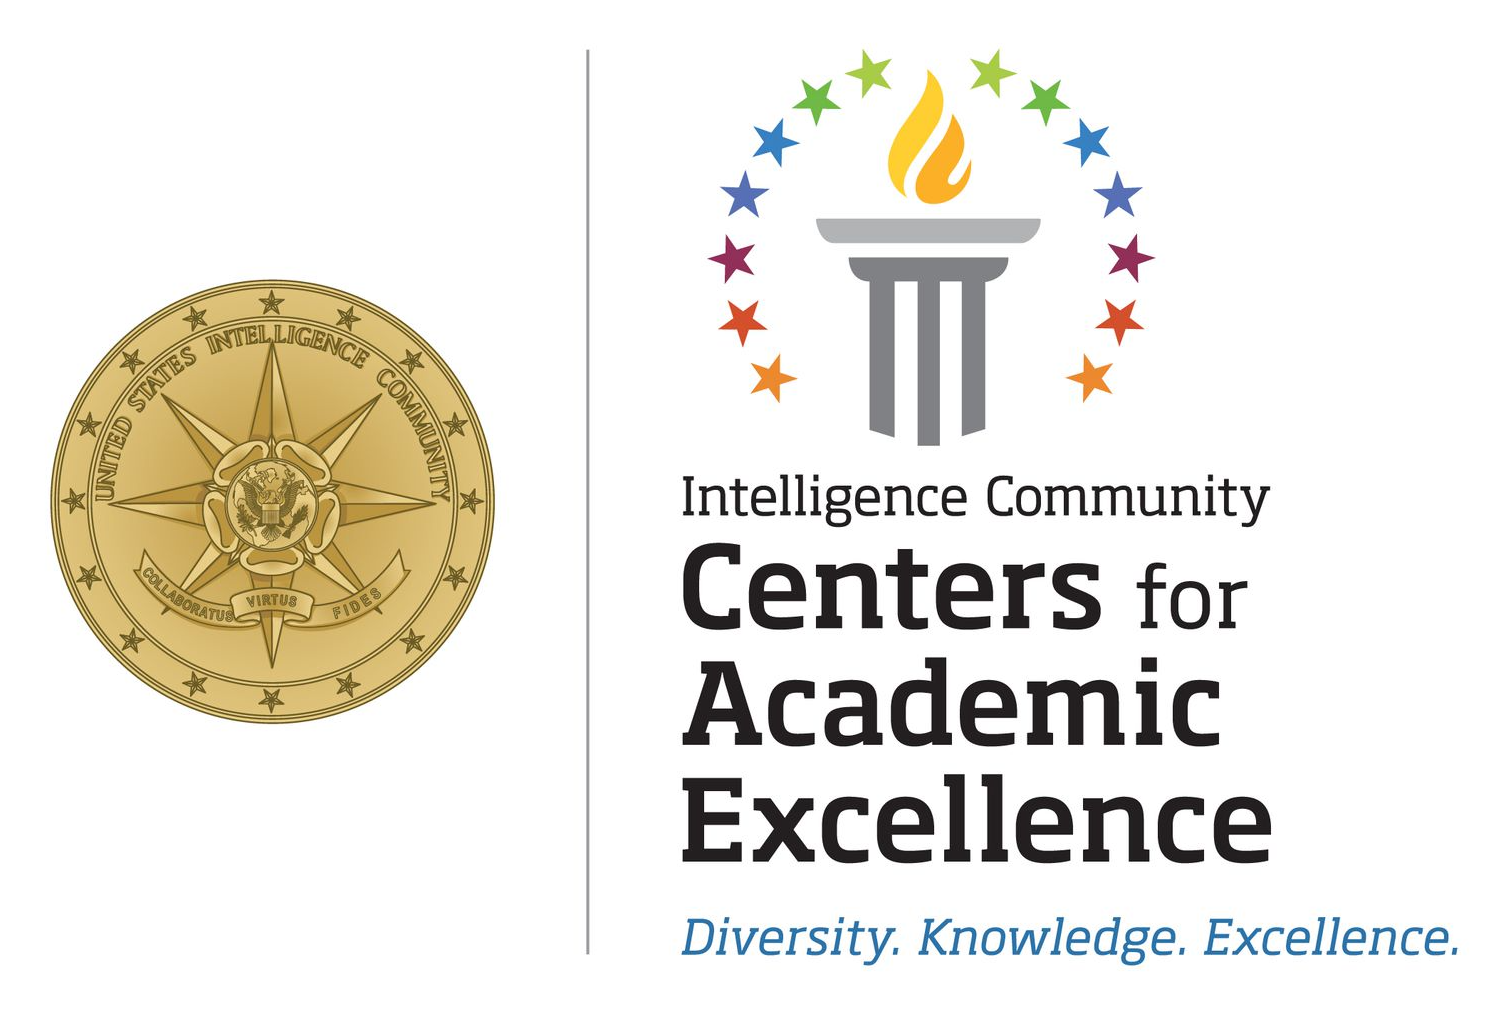 Intelligence Community Centers for Academic Excellence